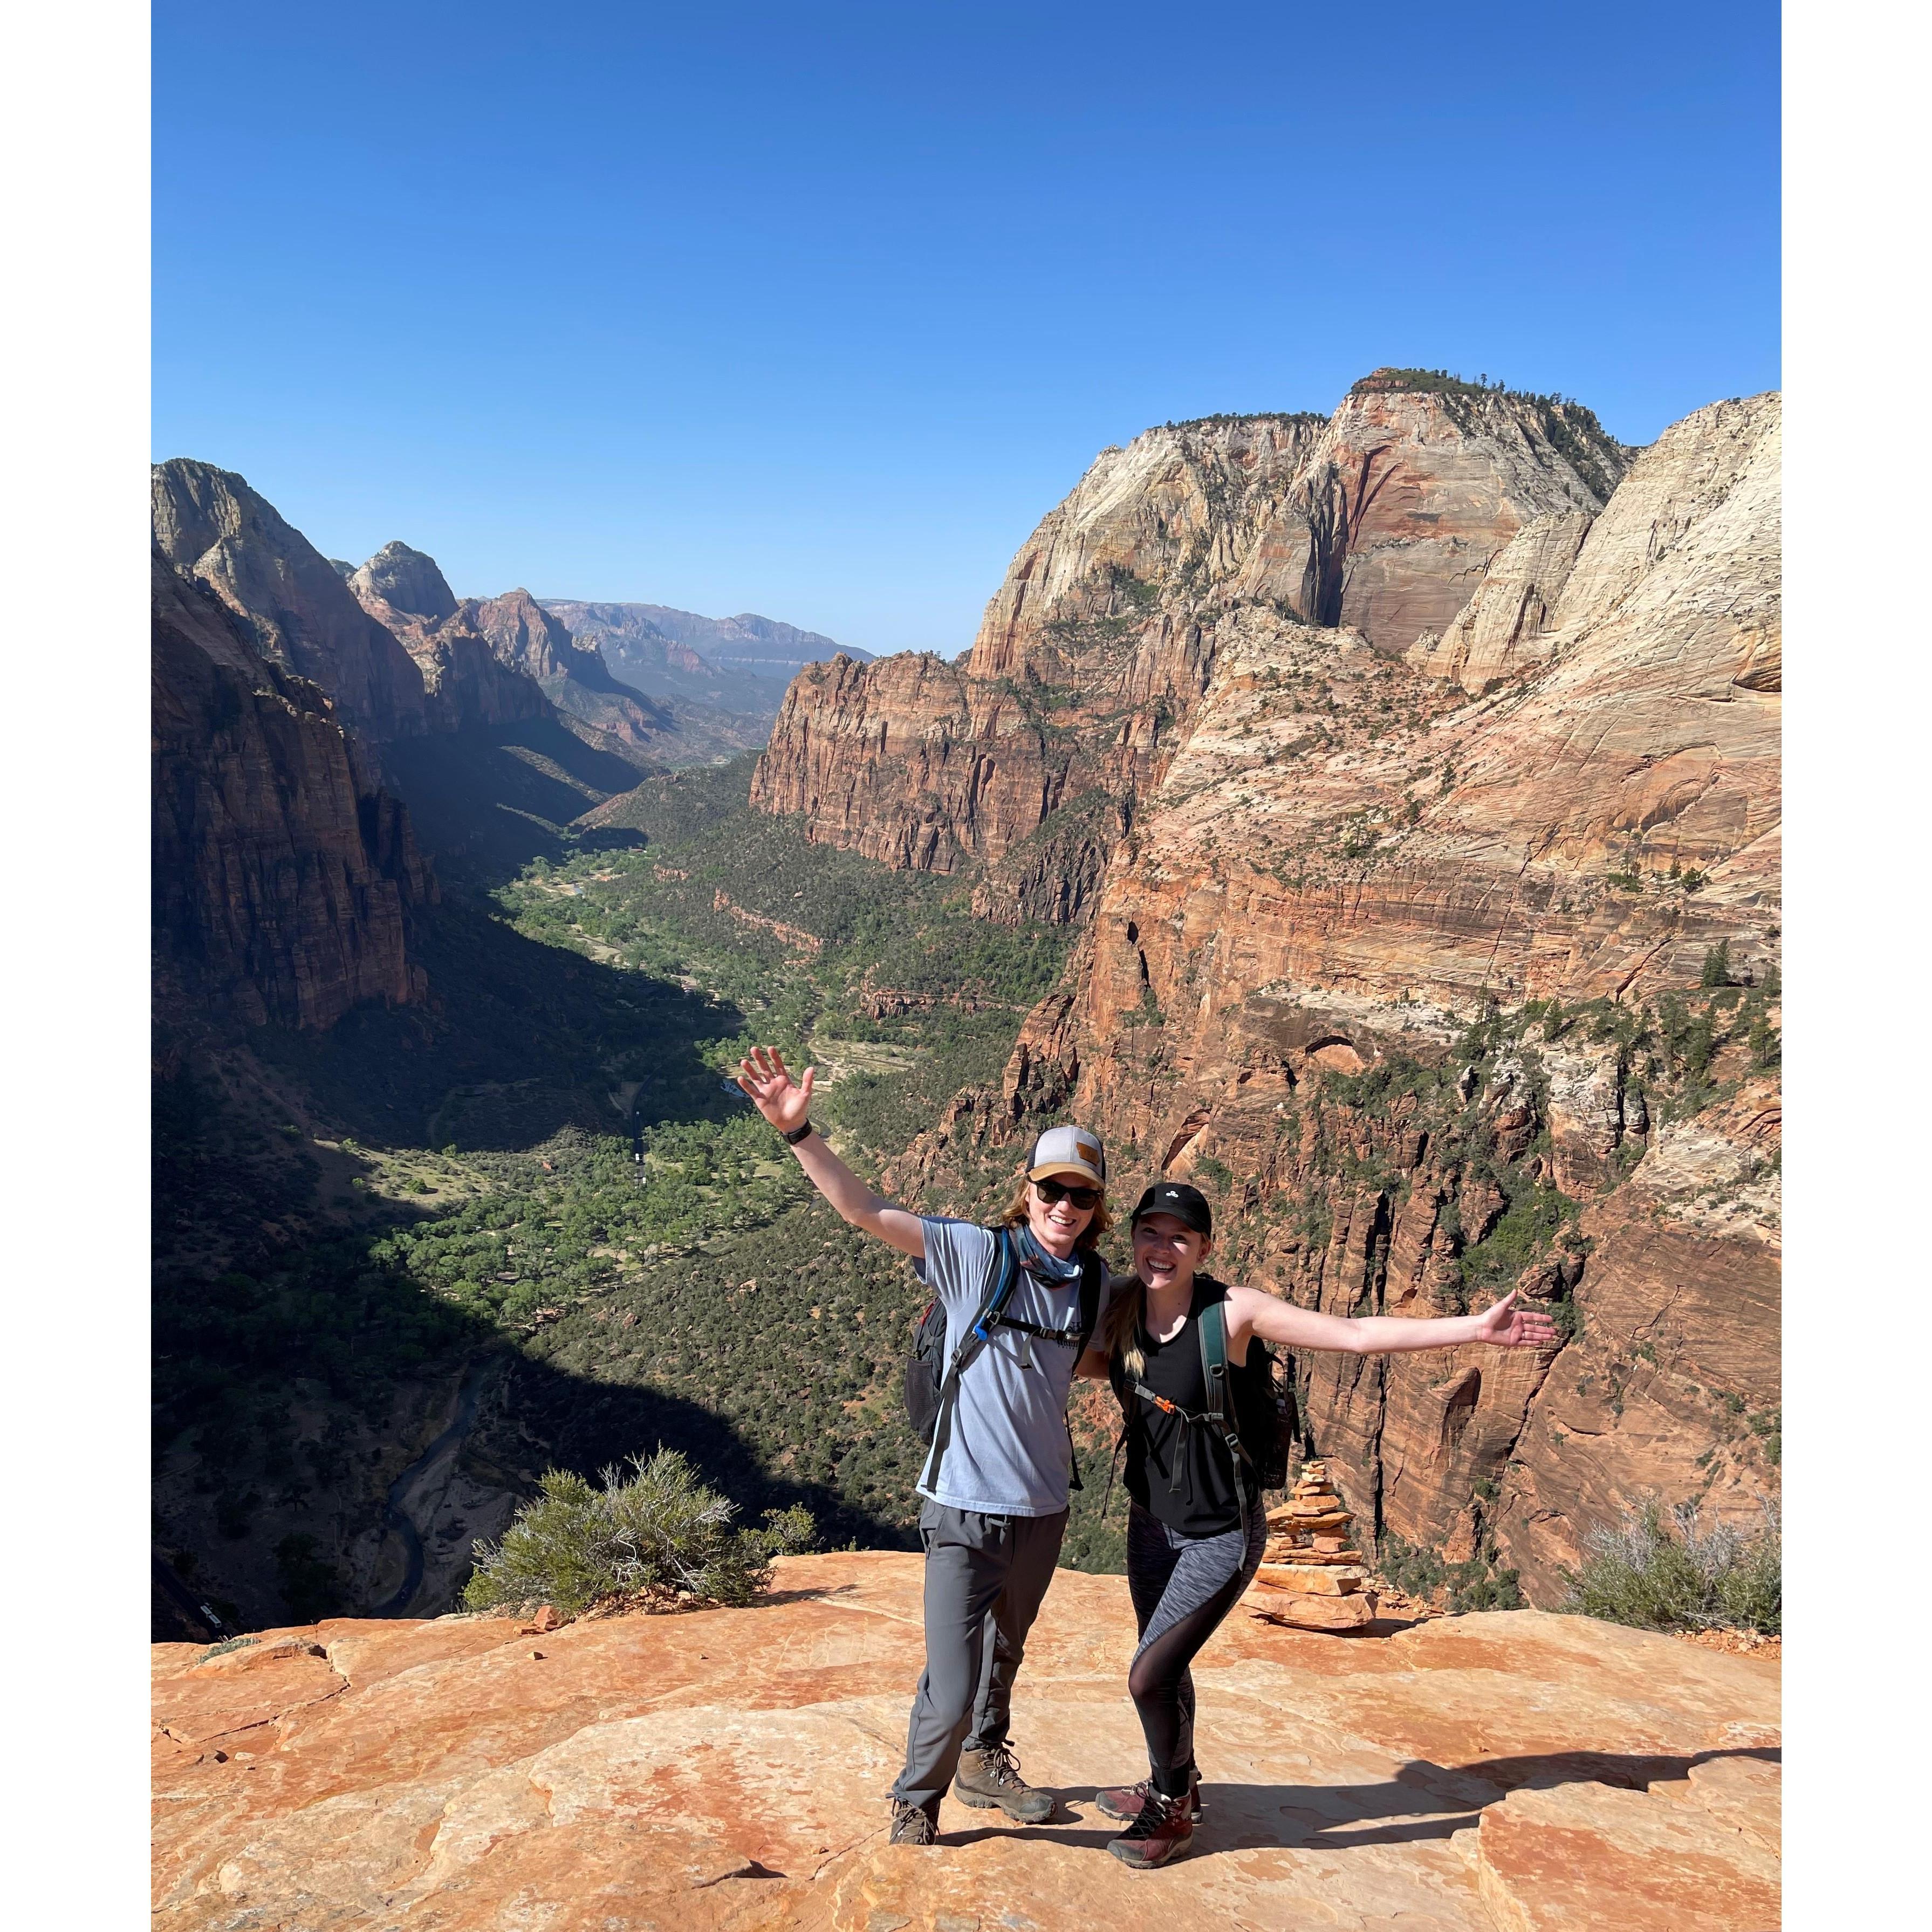 Celebrating after making the climb to the top of Angels Landing in Zion National Park.